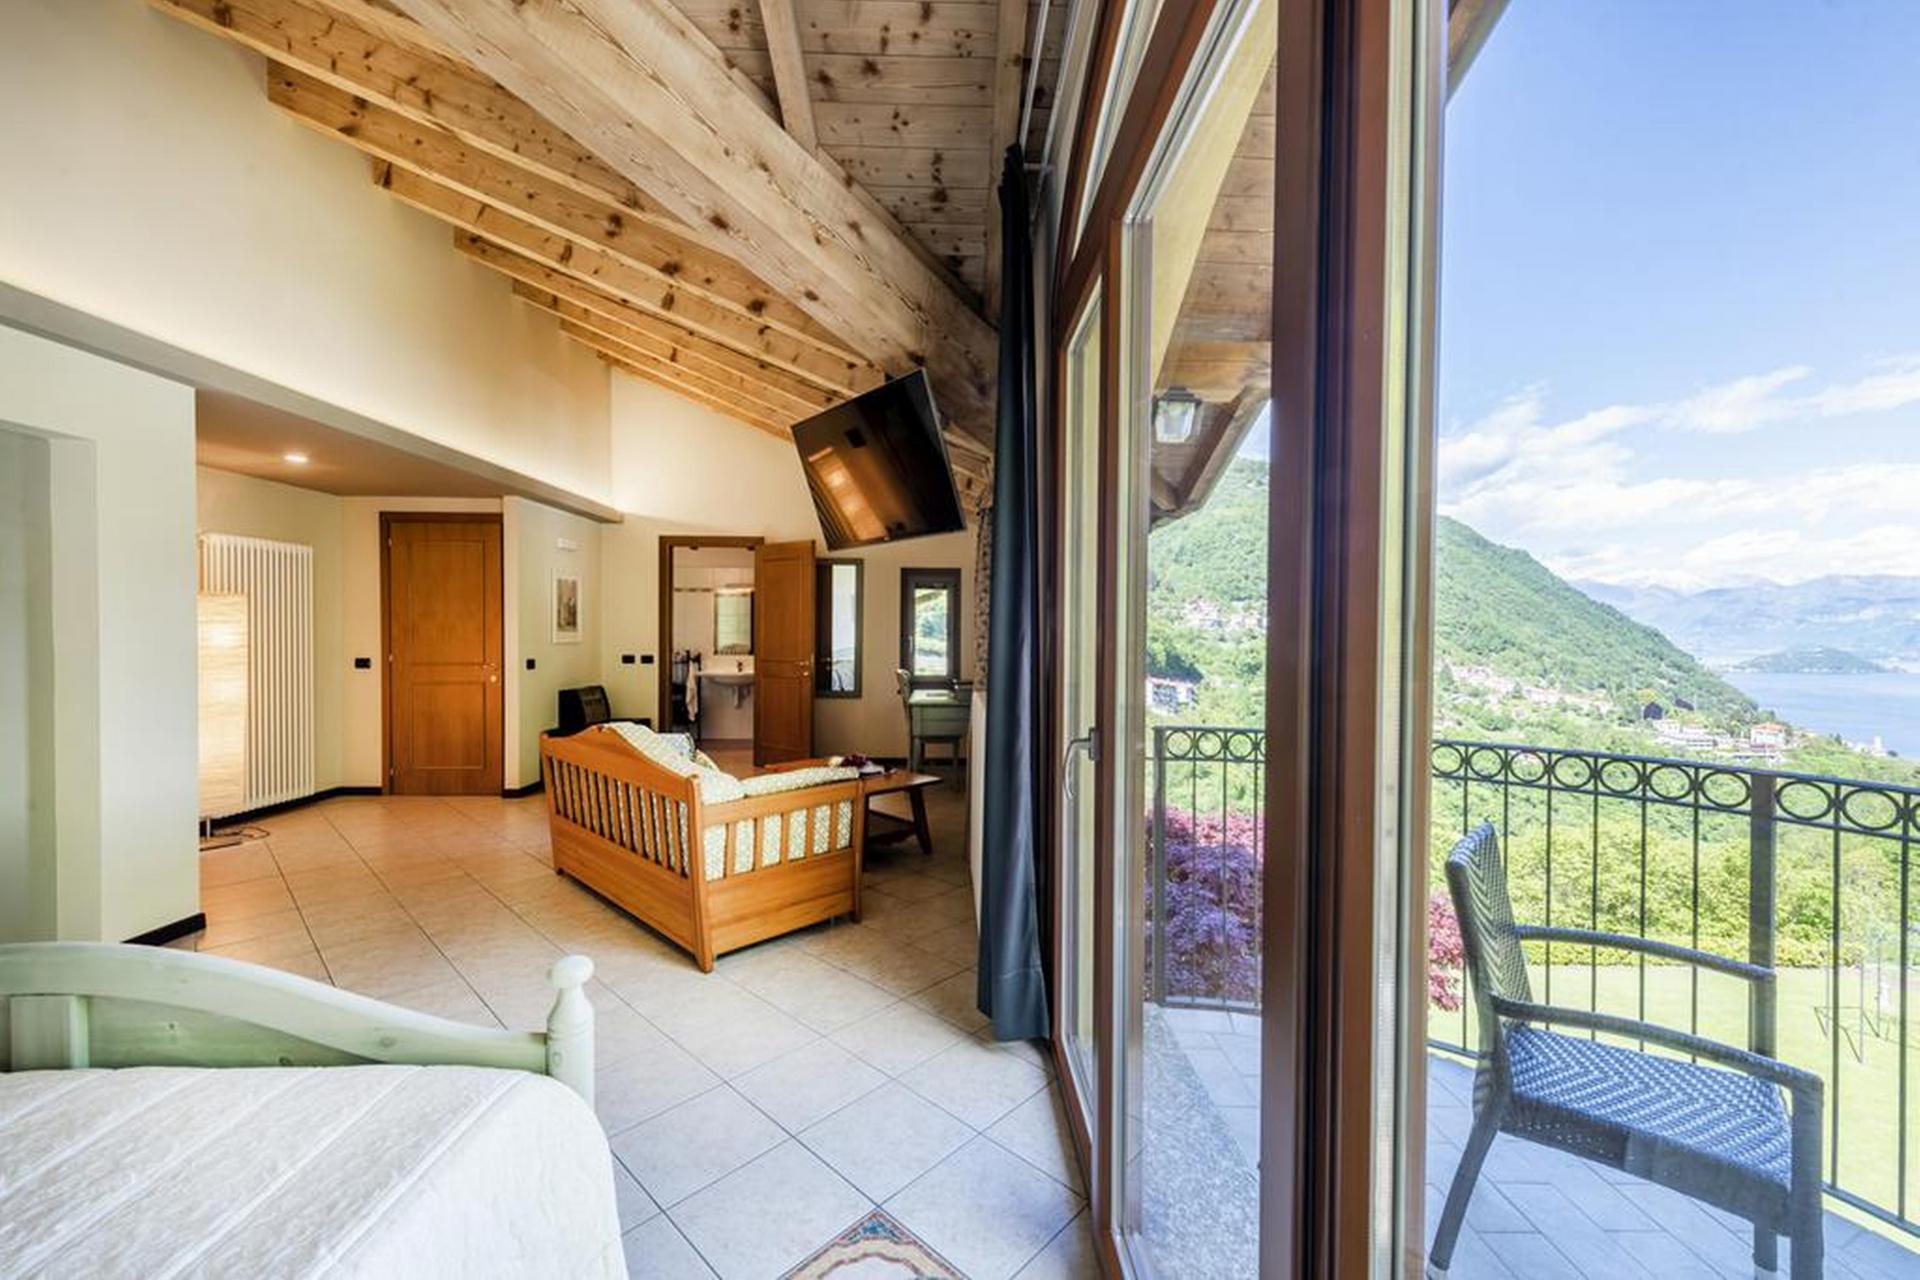 Agriturismo with restaurant and views of Lake Como